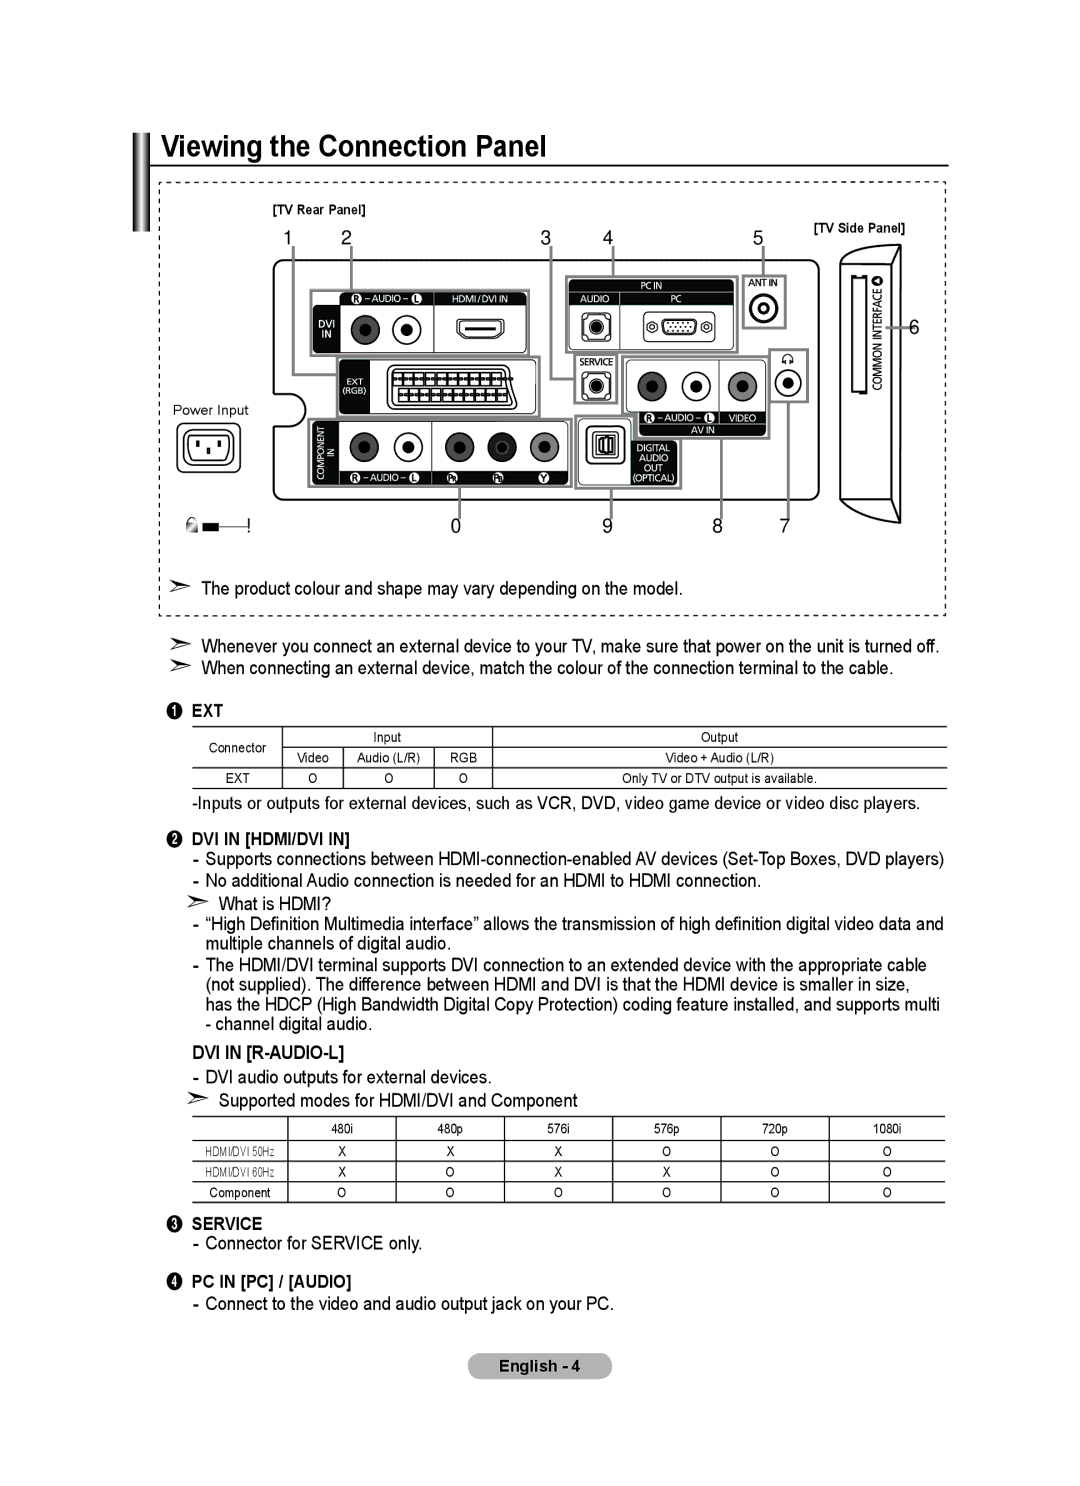 Samsung LE22A455C1D user manual Viewing the Connection Panel, Connector for Service only 